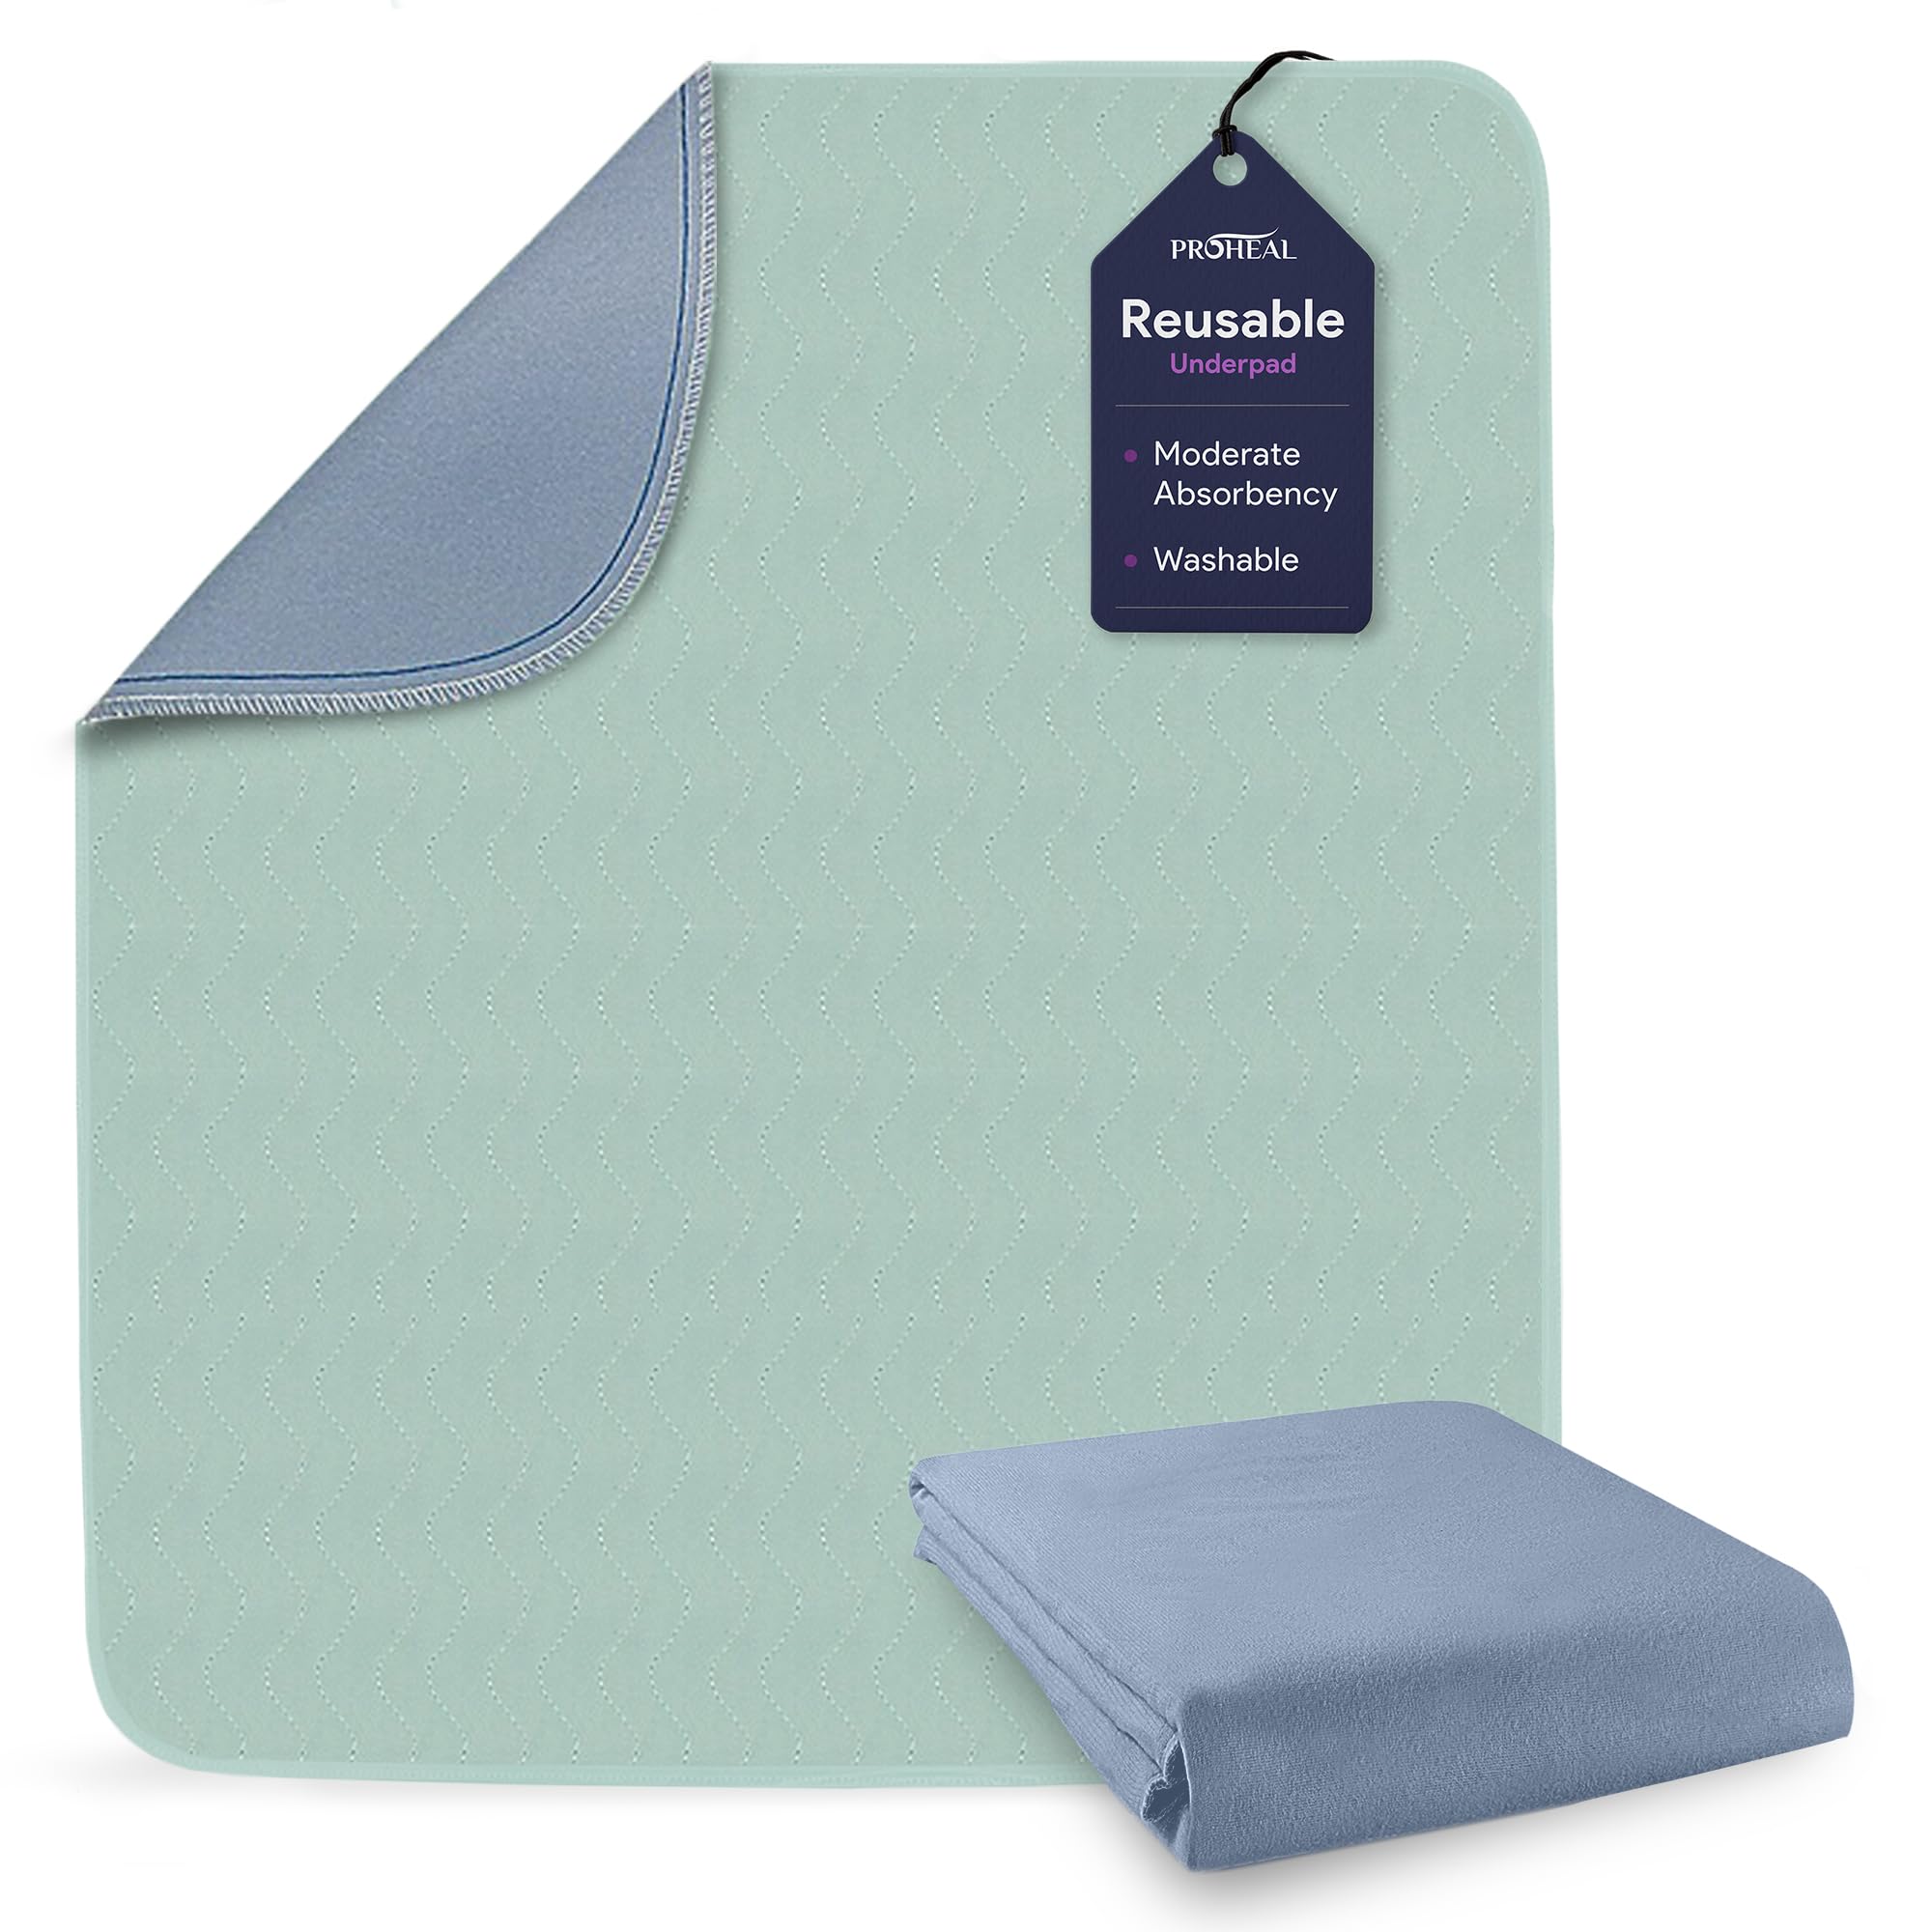 Incontinence Bed Pads Washable - Quick Dry Waterproof Bed Pads - Soft and Breathable Poly Laminated Chucks - Heavy Duty Absorbent Reusable Pee Pads for Adults  - Acceptable